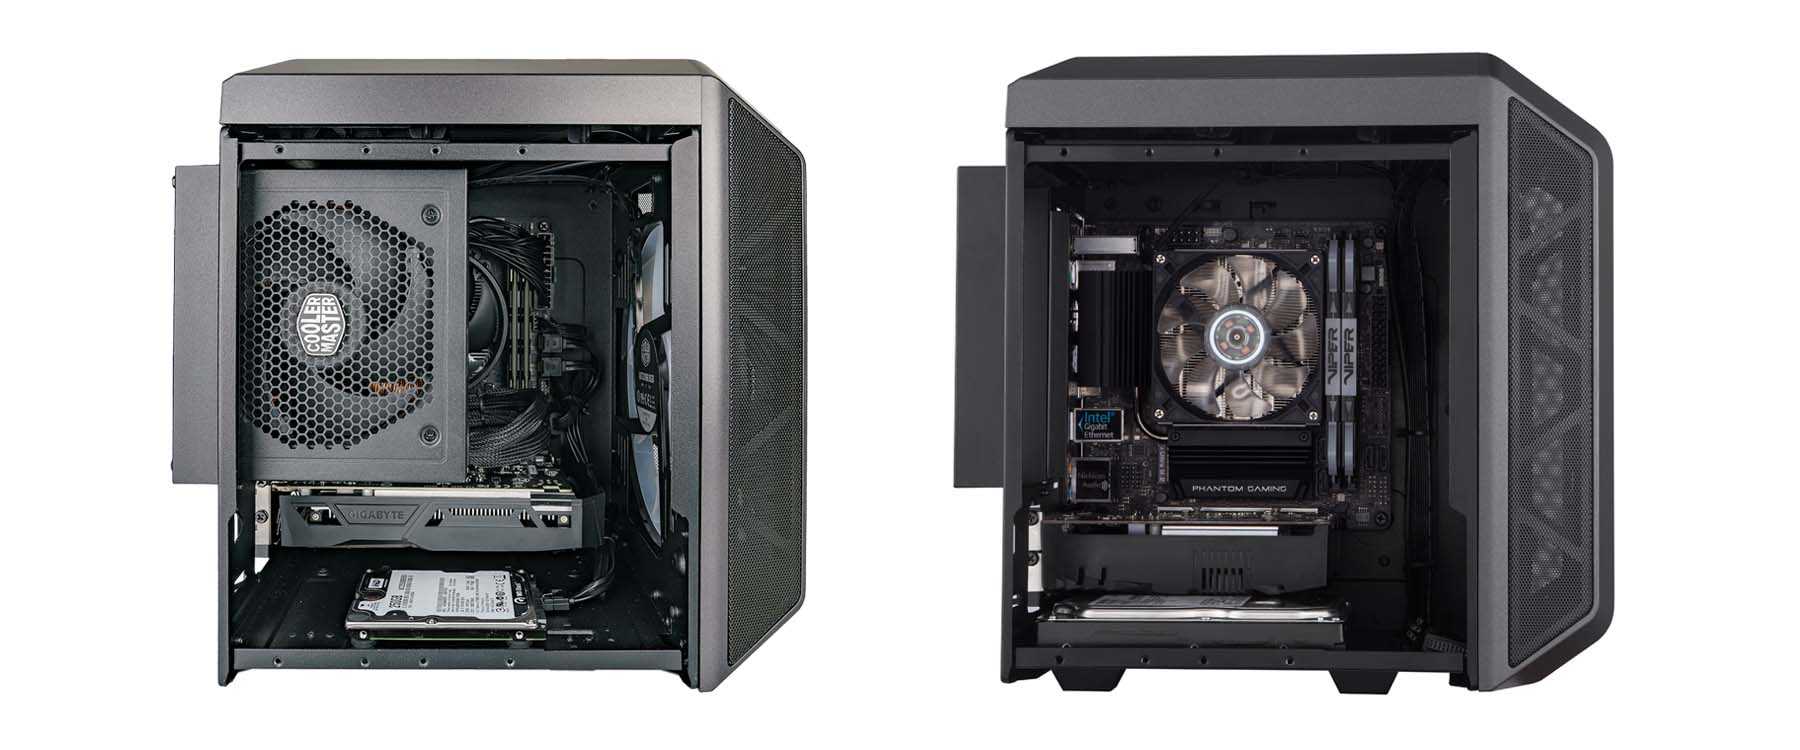 Cooler master mastercase h100 mini-itx chassis review | tweaktown